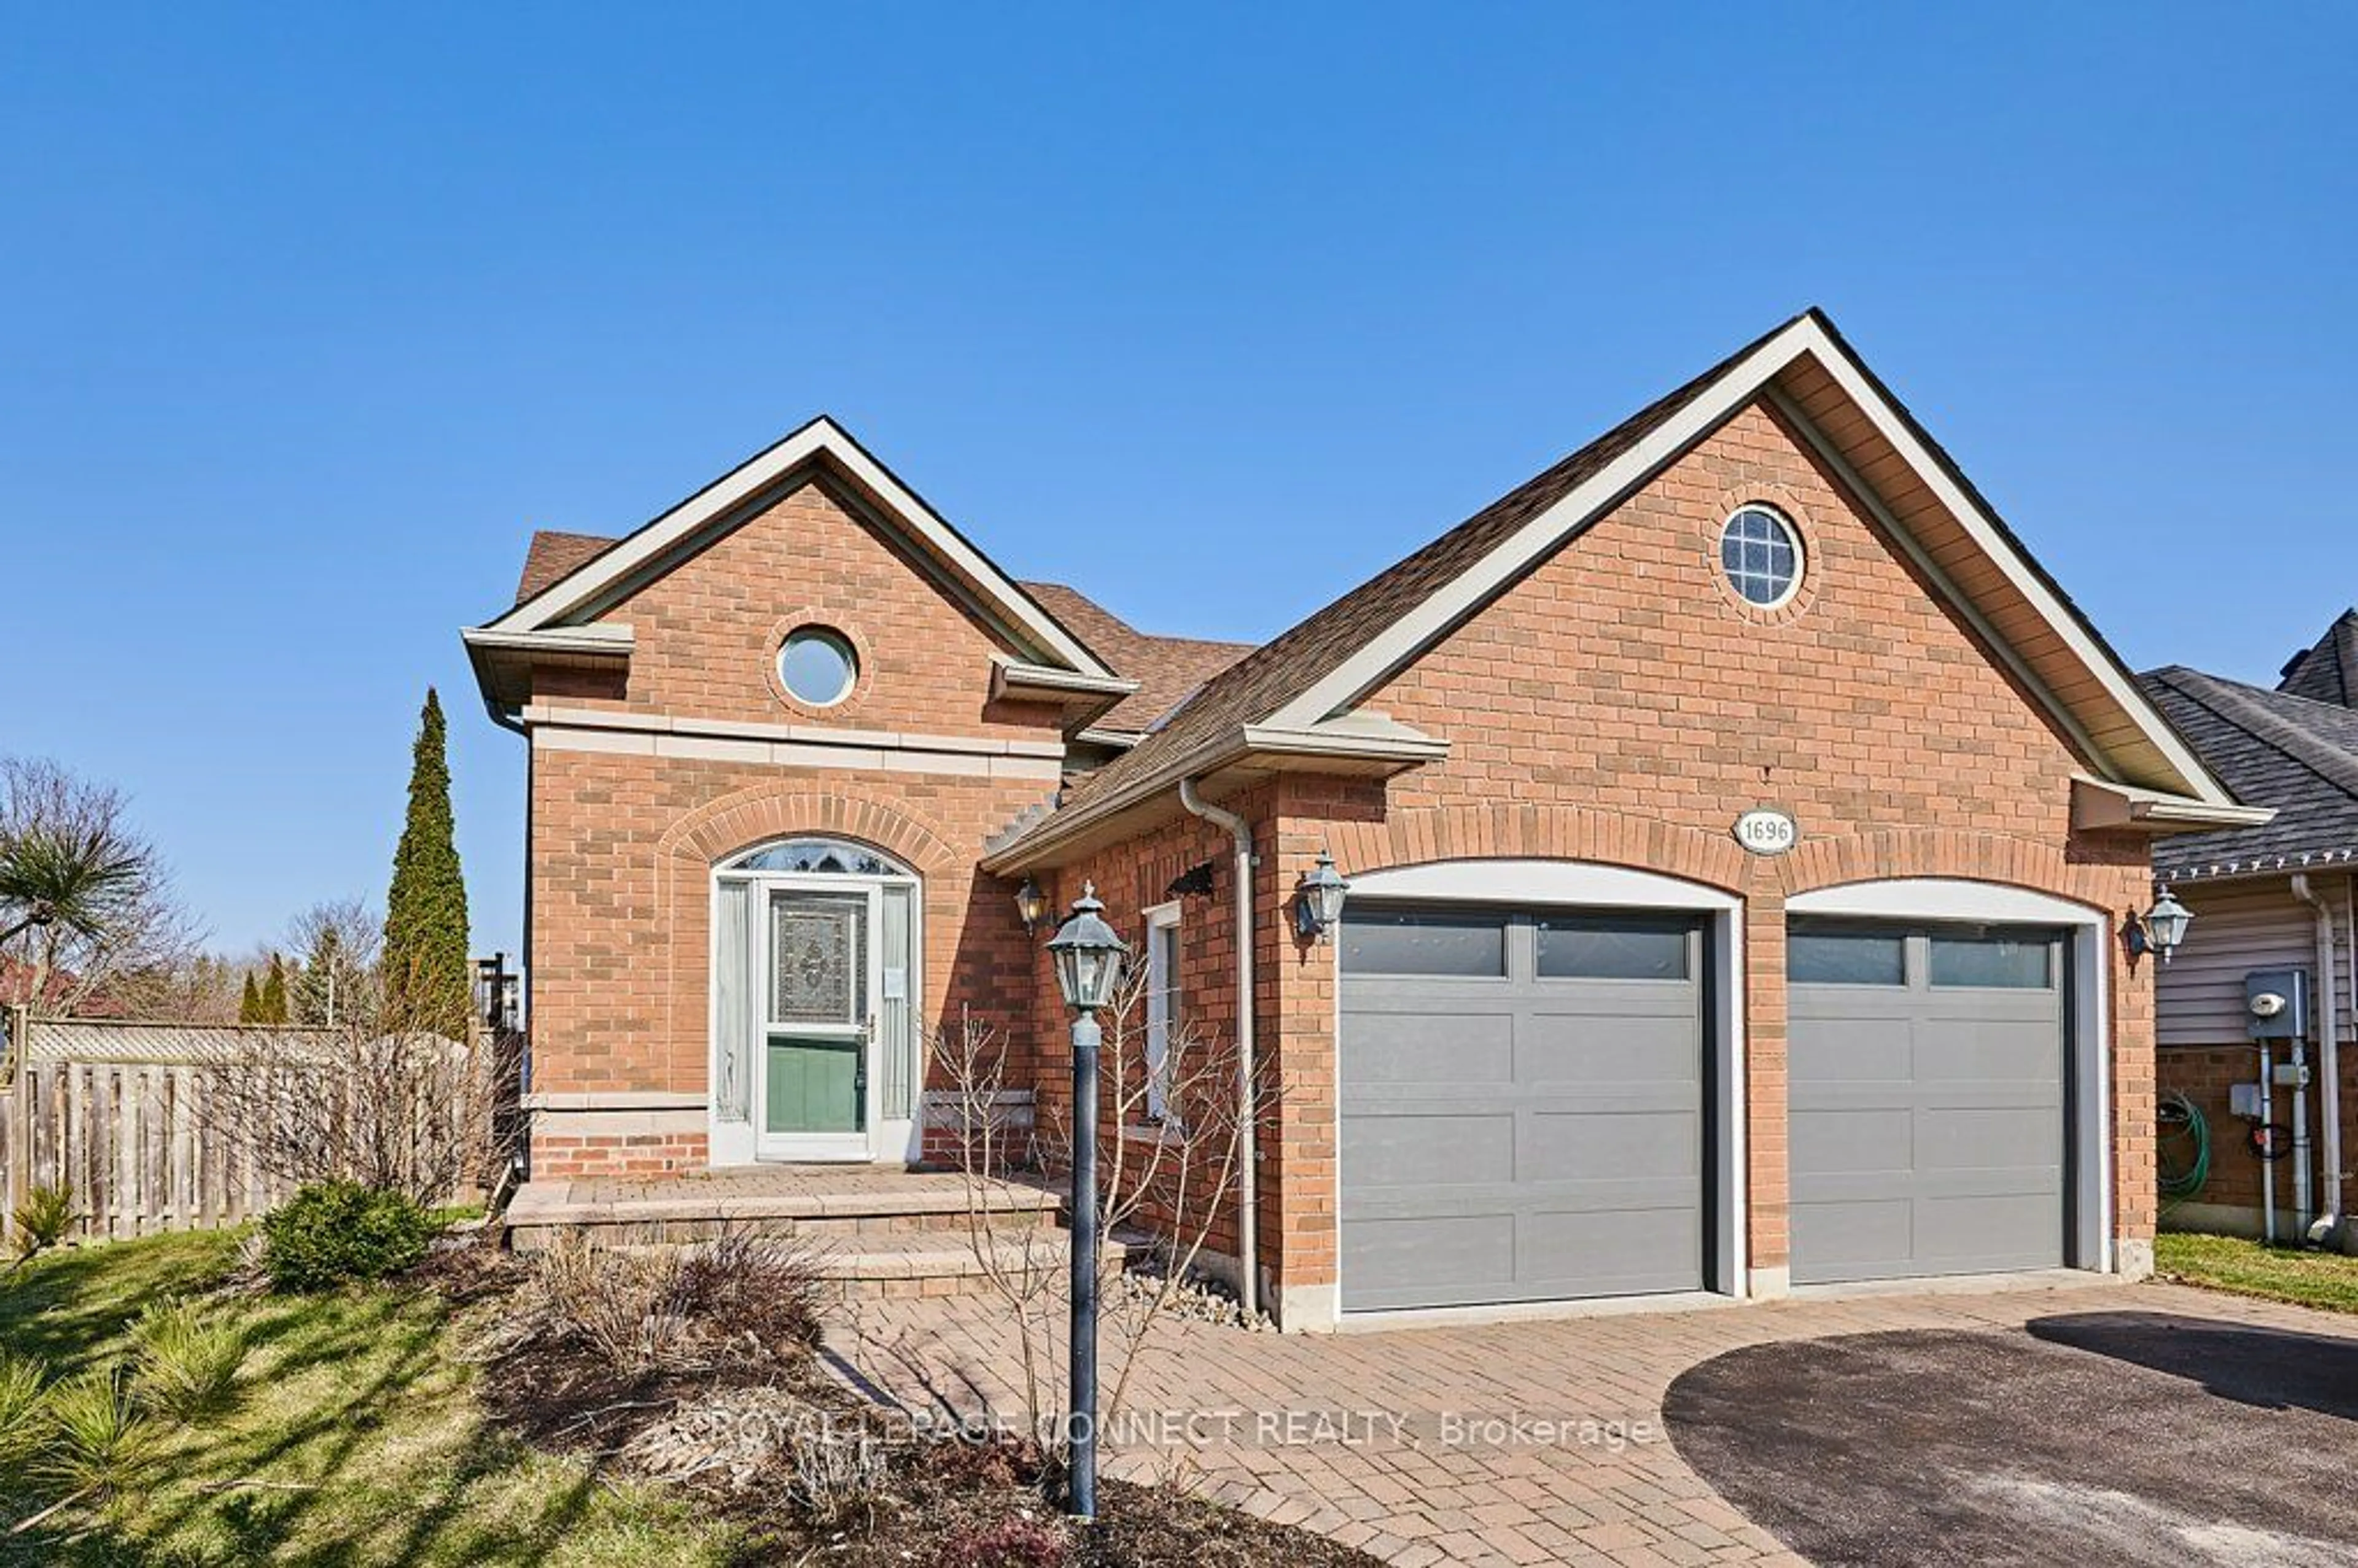 Home with brick exterior material for 1696 Edenwood Dr, Oshawa Ontario L1G 7Y5